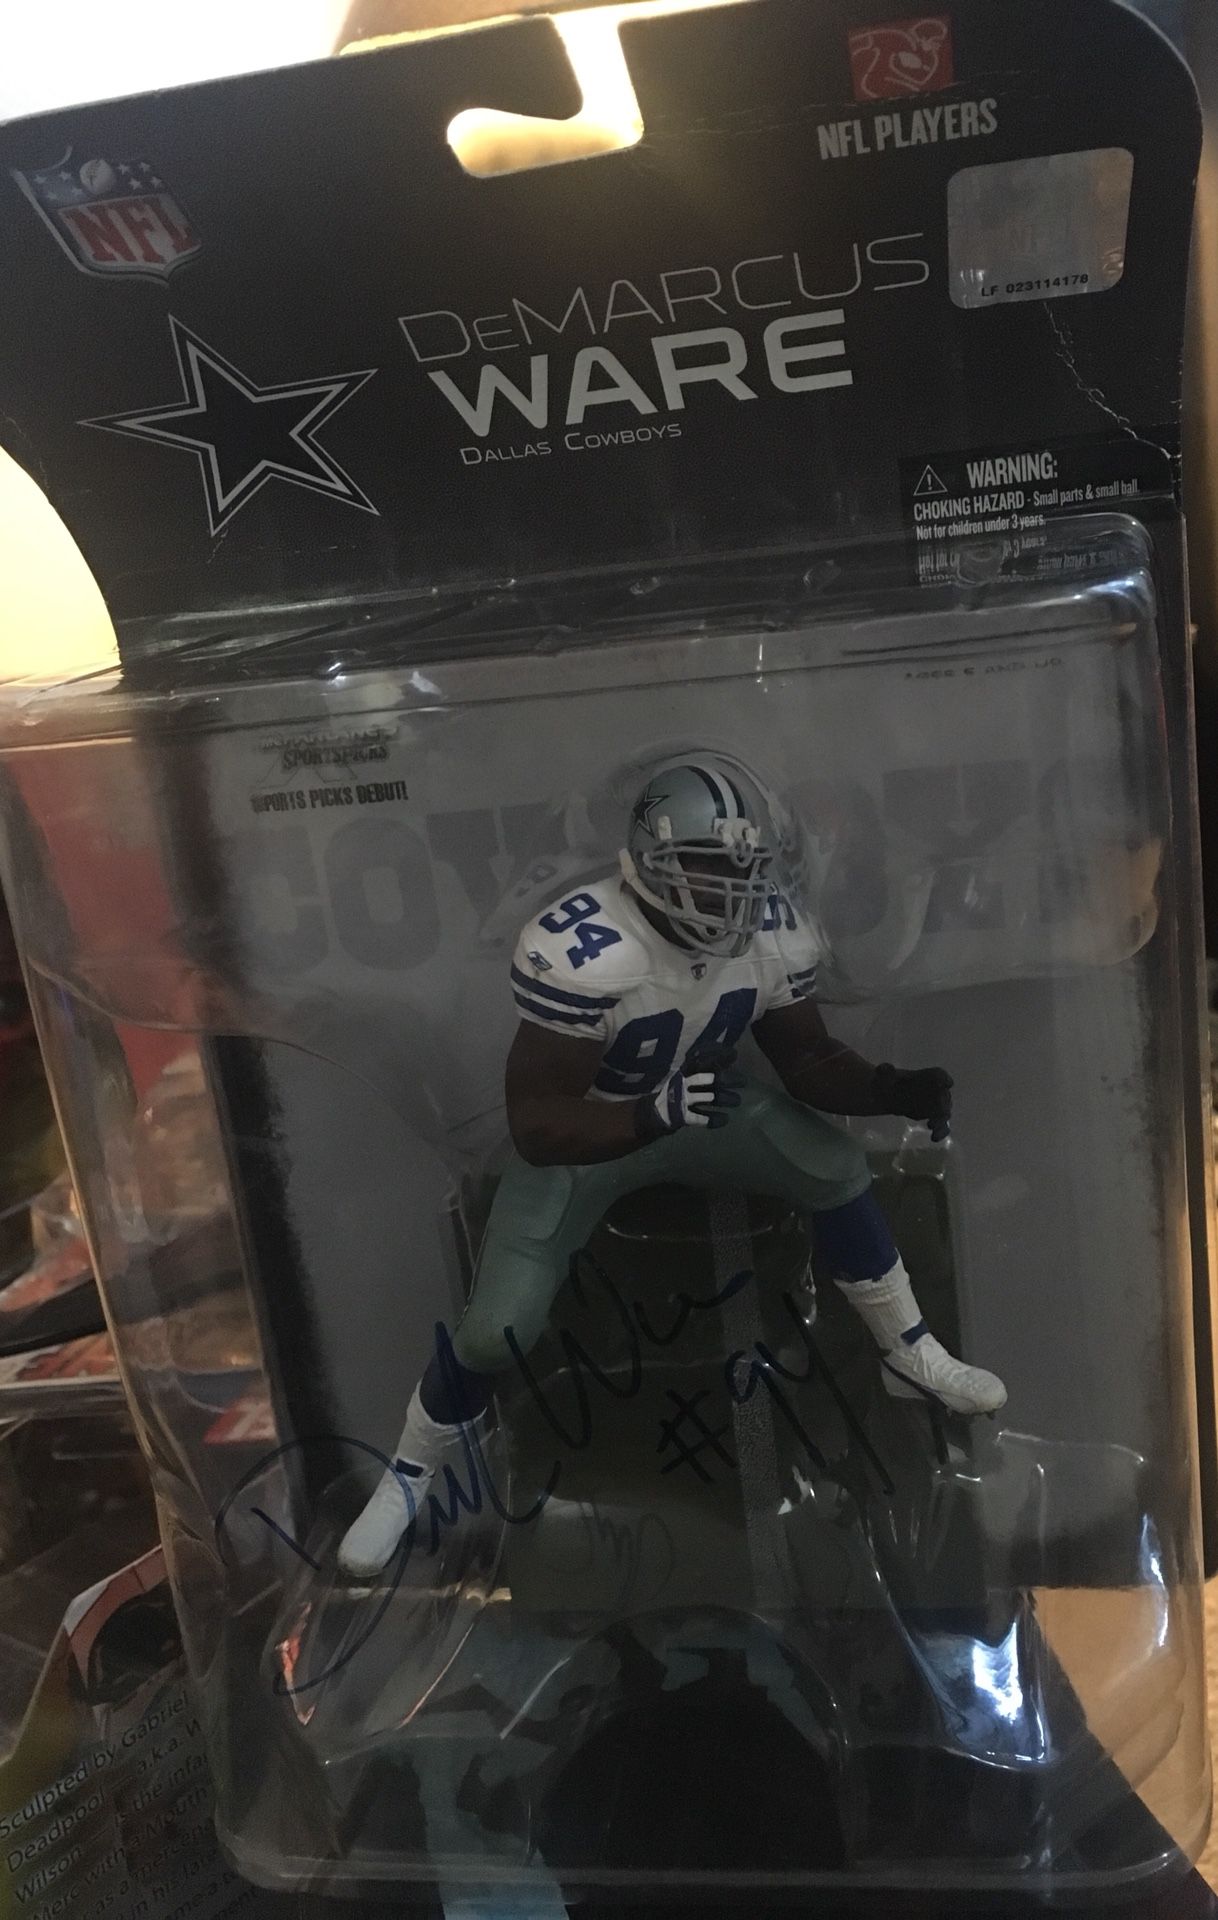 Autographed Demarcus Ware figure by Mcfarlane Toys